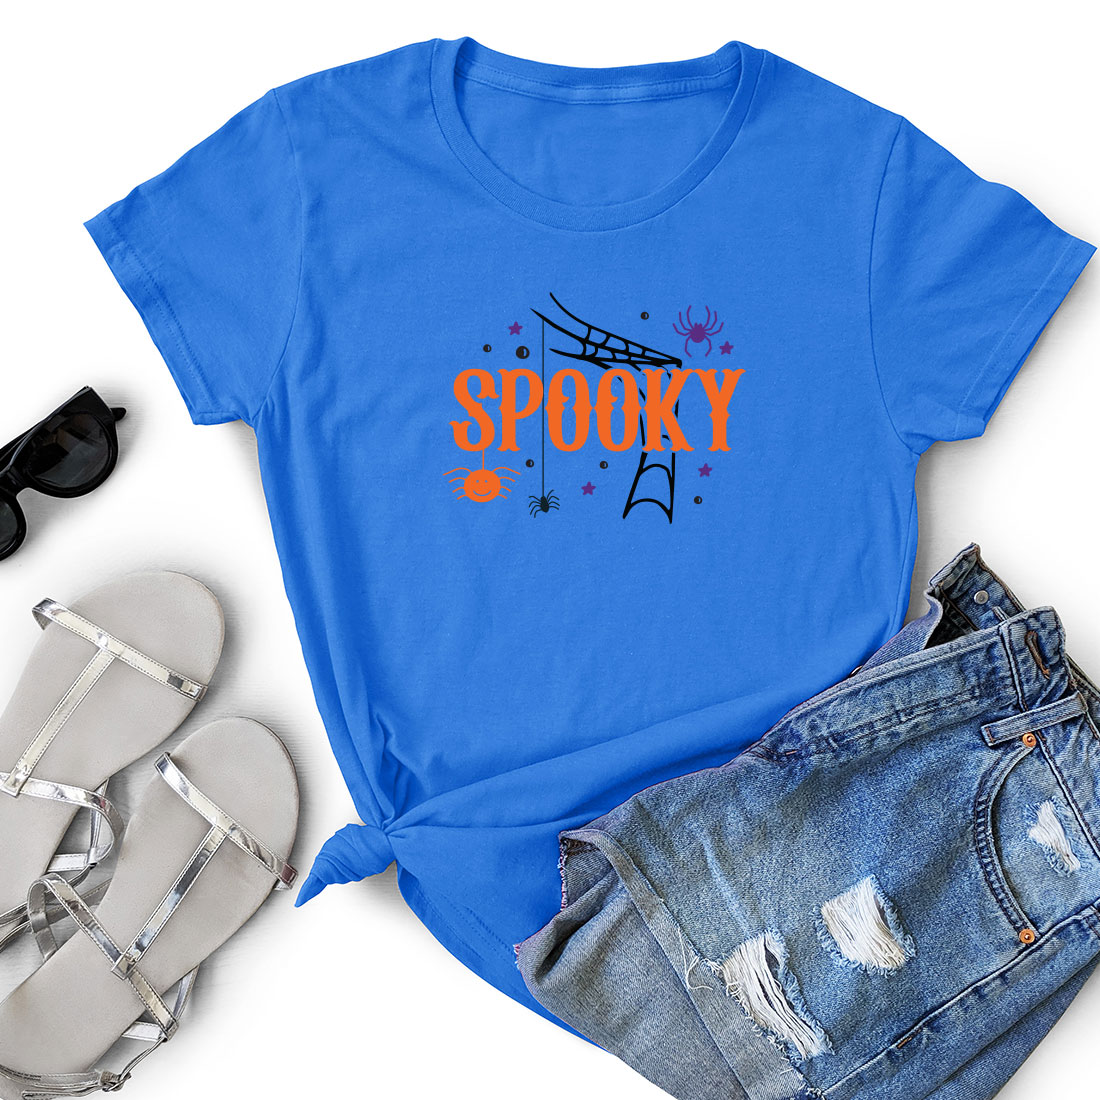 T - shirt that says spooky on it next to a pair of.